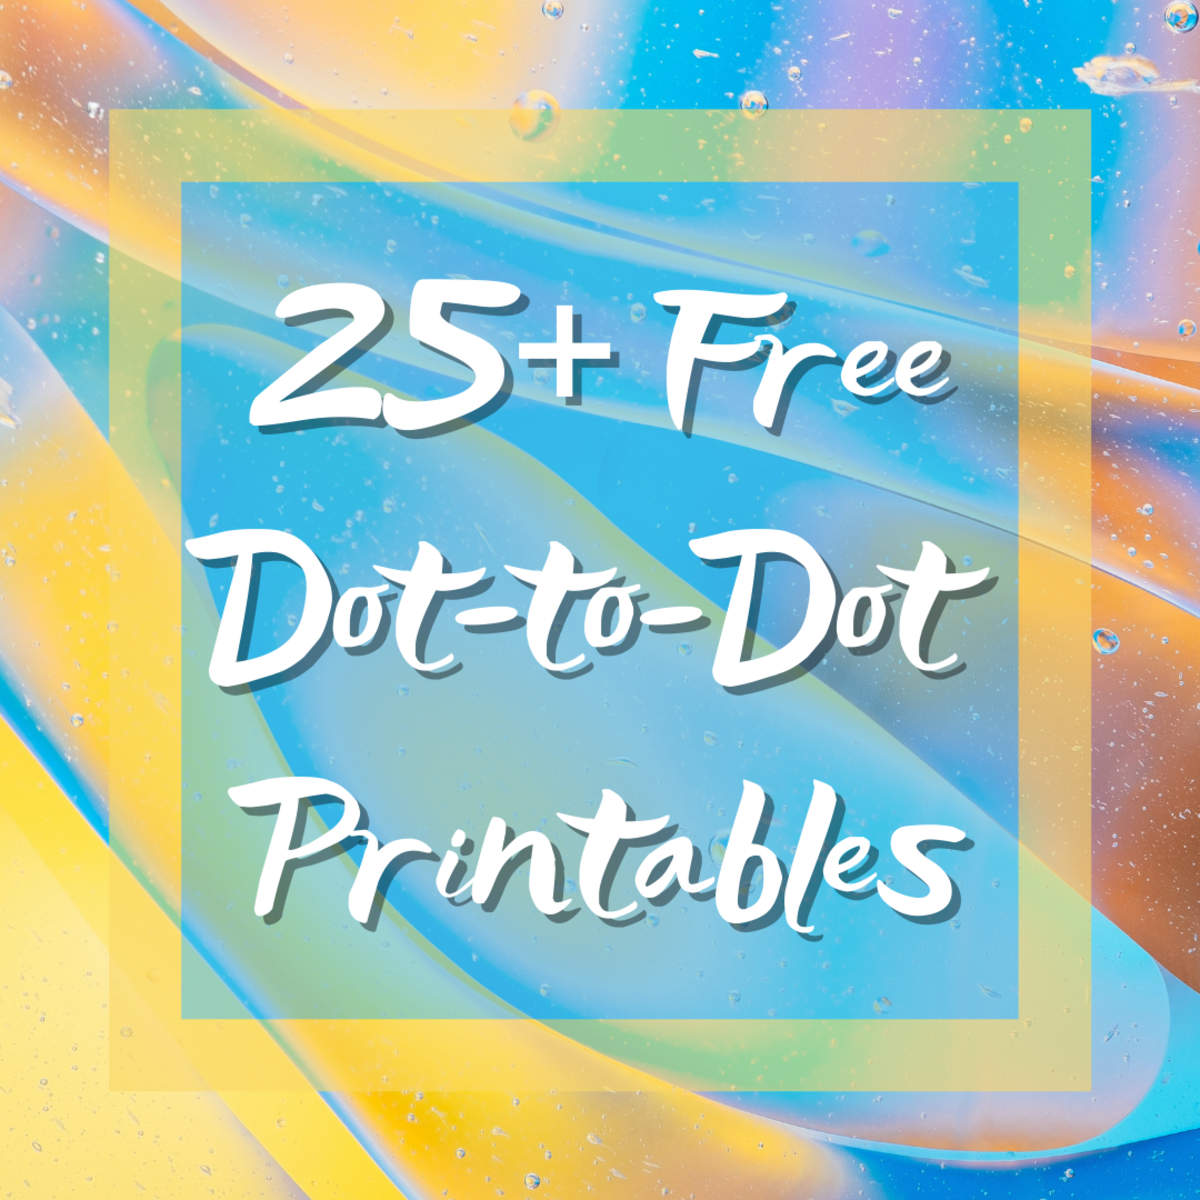 25 Free Dot to Dot Printables From Very Easy To Extreme FeltMagnet